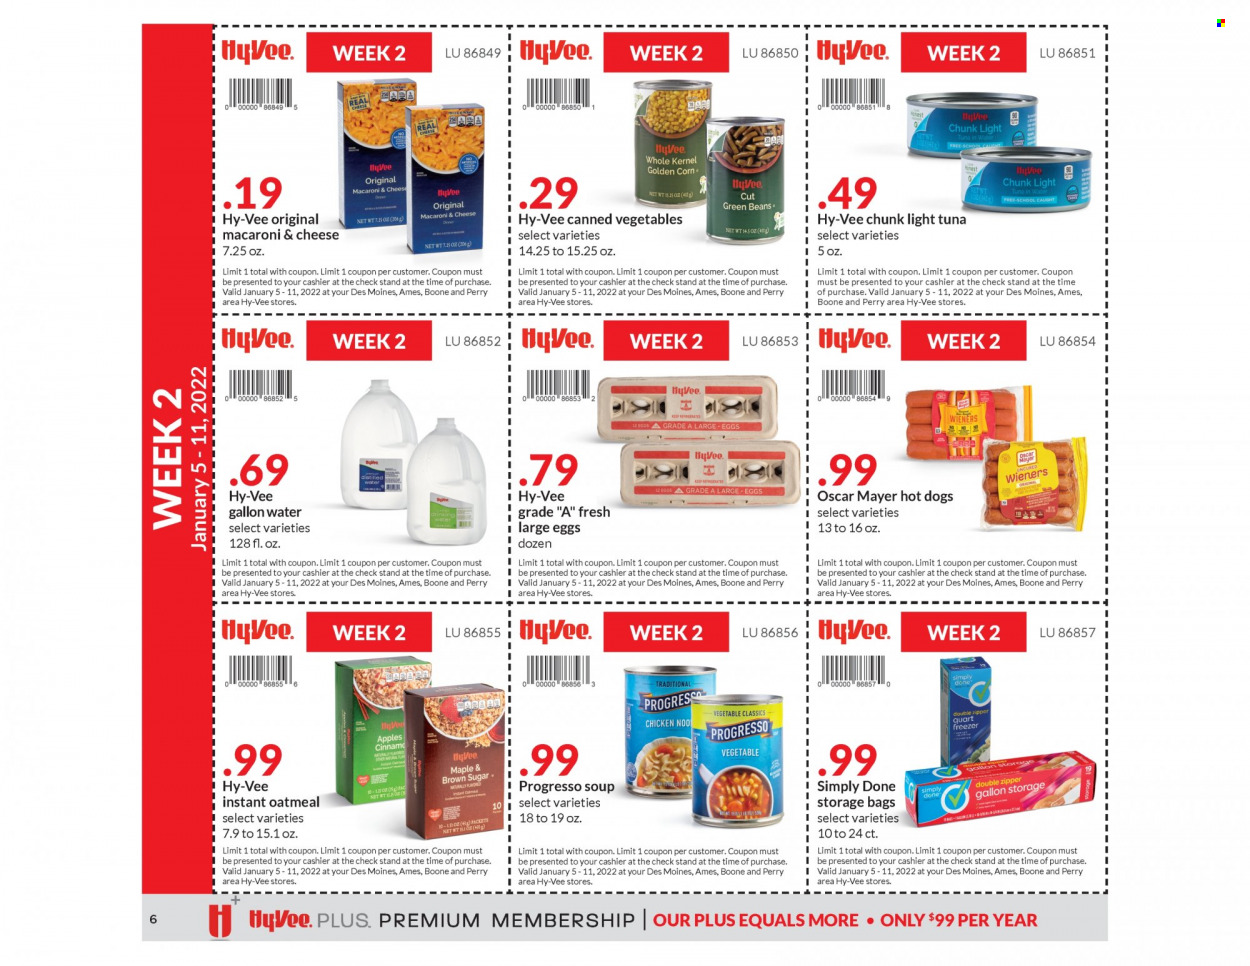 thumbnail - Hy-Vee Flyer - 12/29/2021 - 01/24/2022 - Sales products - beans, corn, green beans, apples, tuna, macaroni & cheese, hot dog, Progresso, Oscar Mayer, large eggs, oatmeal, tuna in water, canned vegetables, light tuna, storage bag, gallon. Page 6.